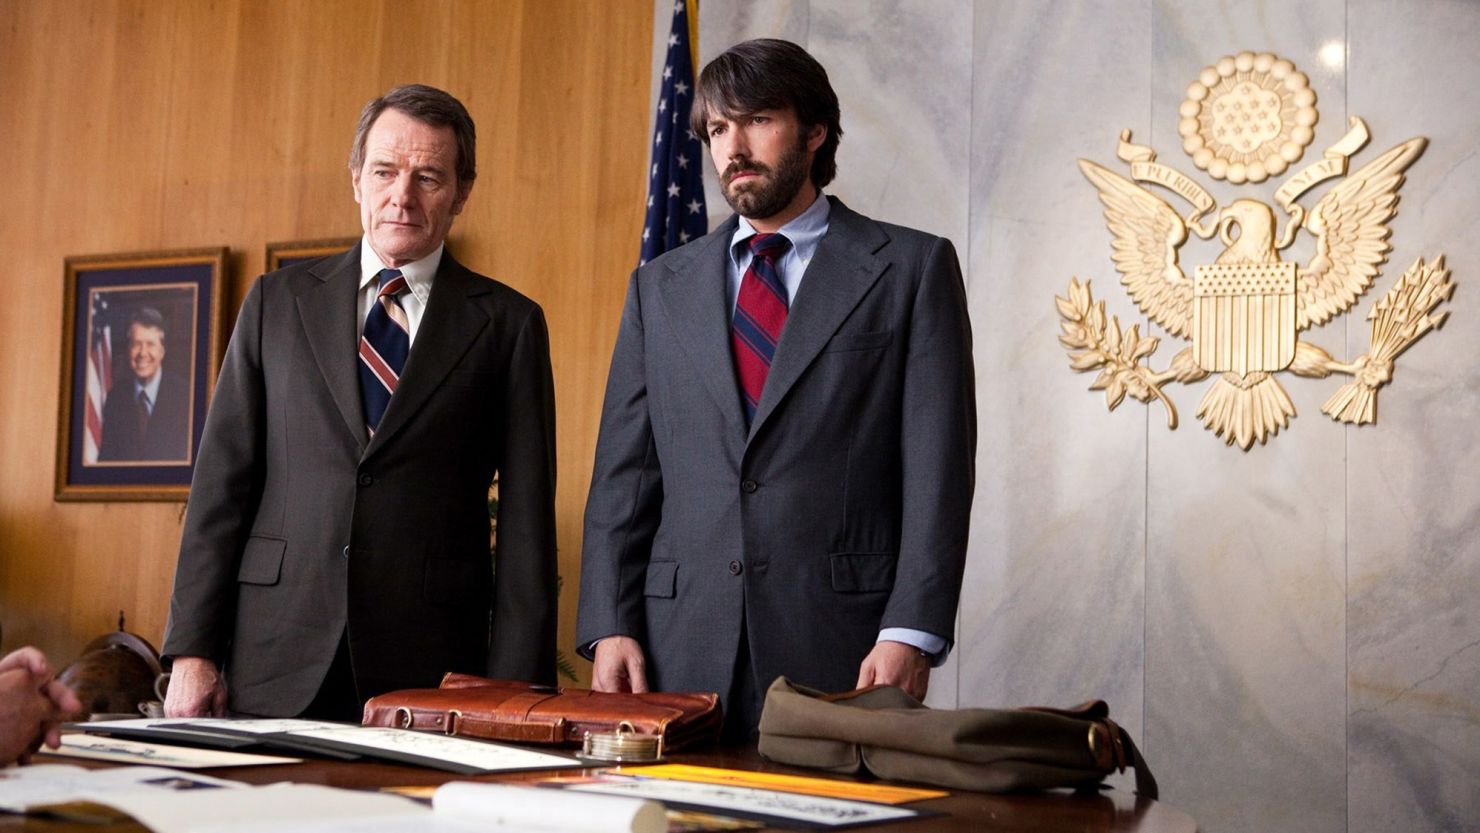 Bryan Cranston, left, and Ben Affleck appear in a scene from the film "Argo."